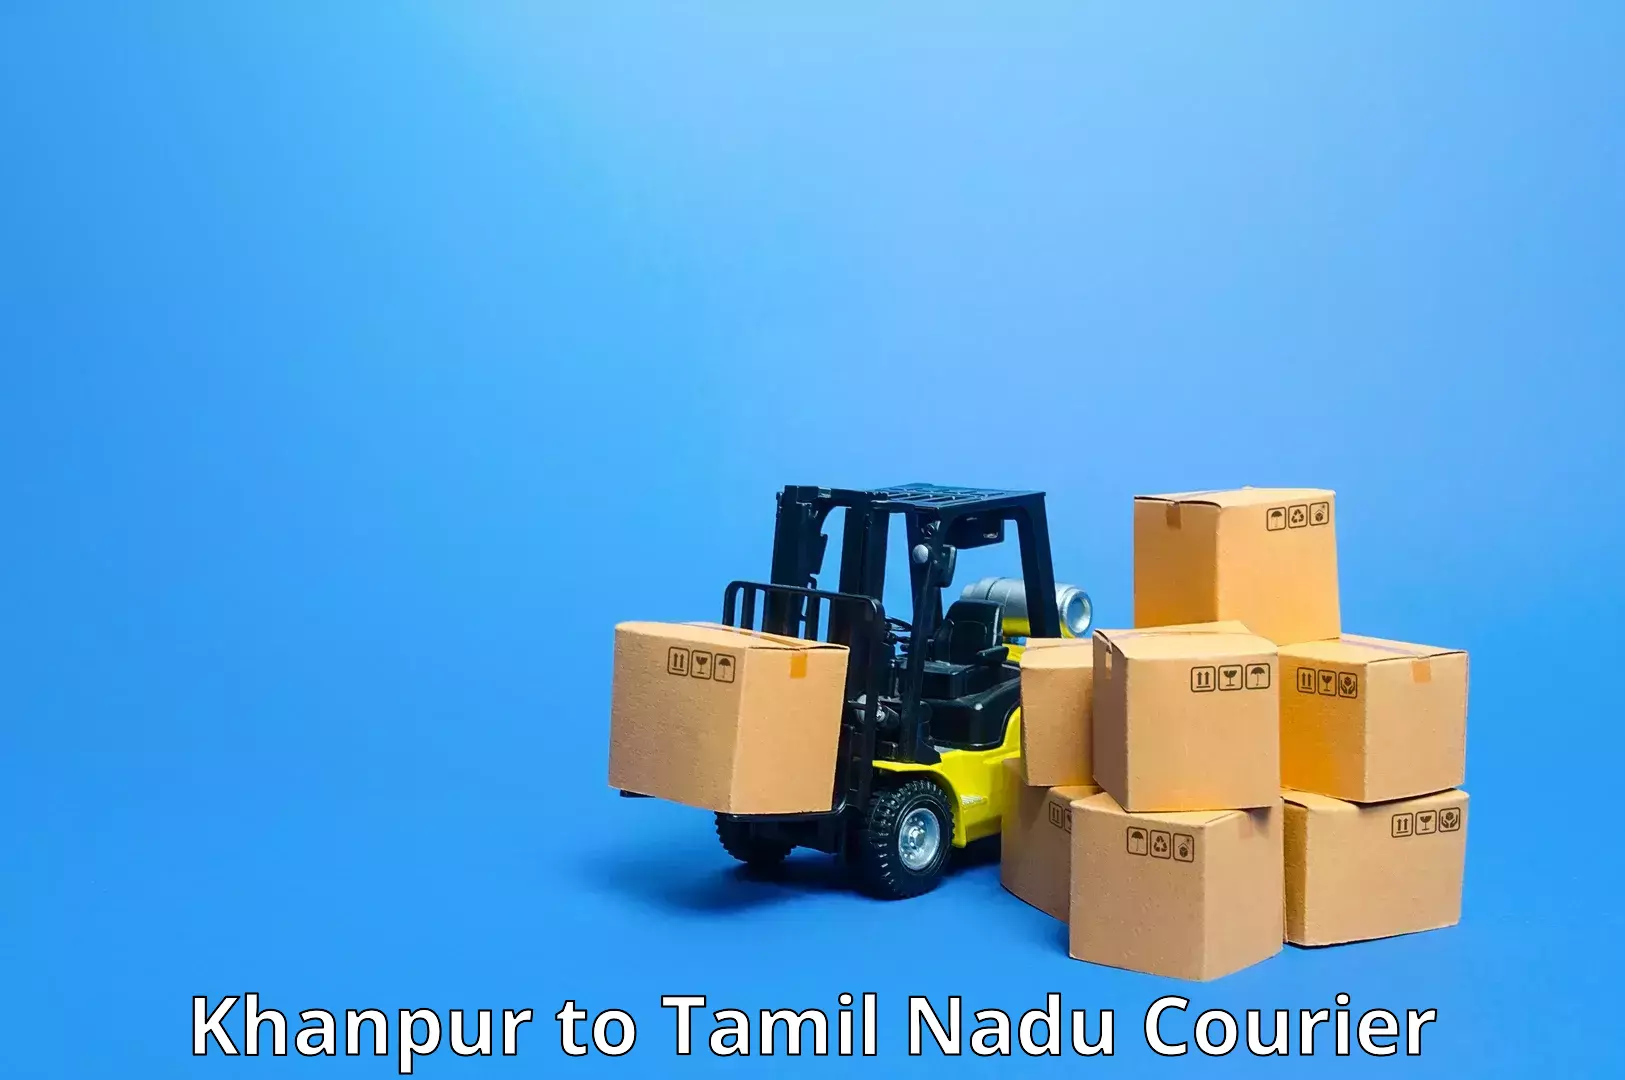 Customized delivery options in Khanpur to Tiruppur